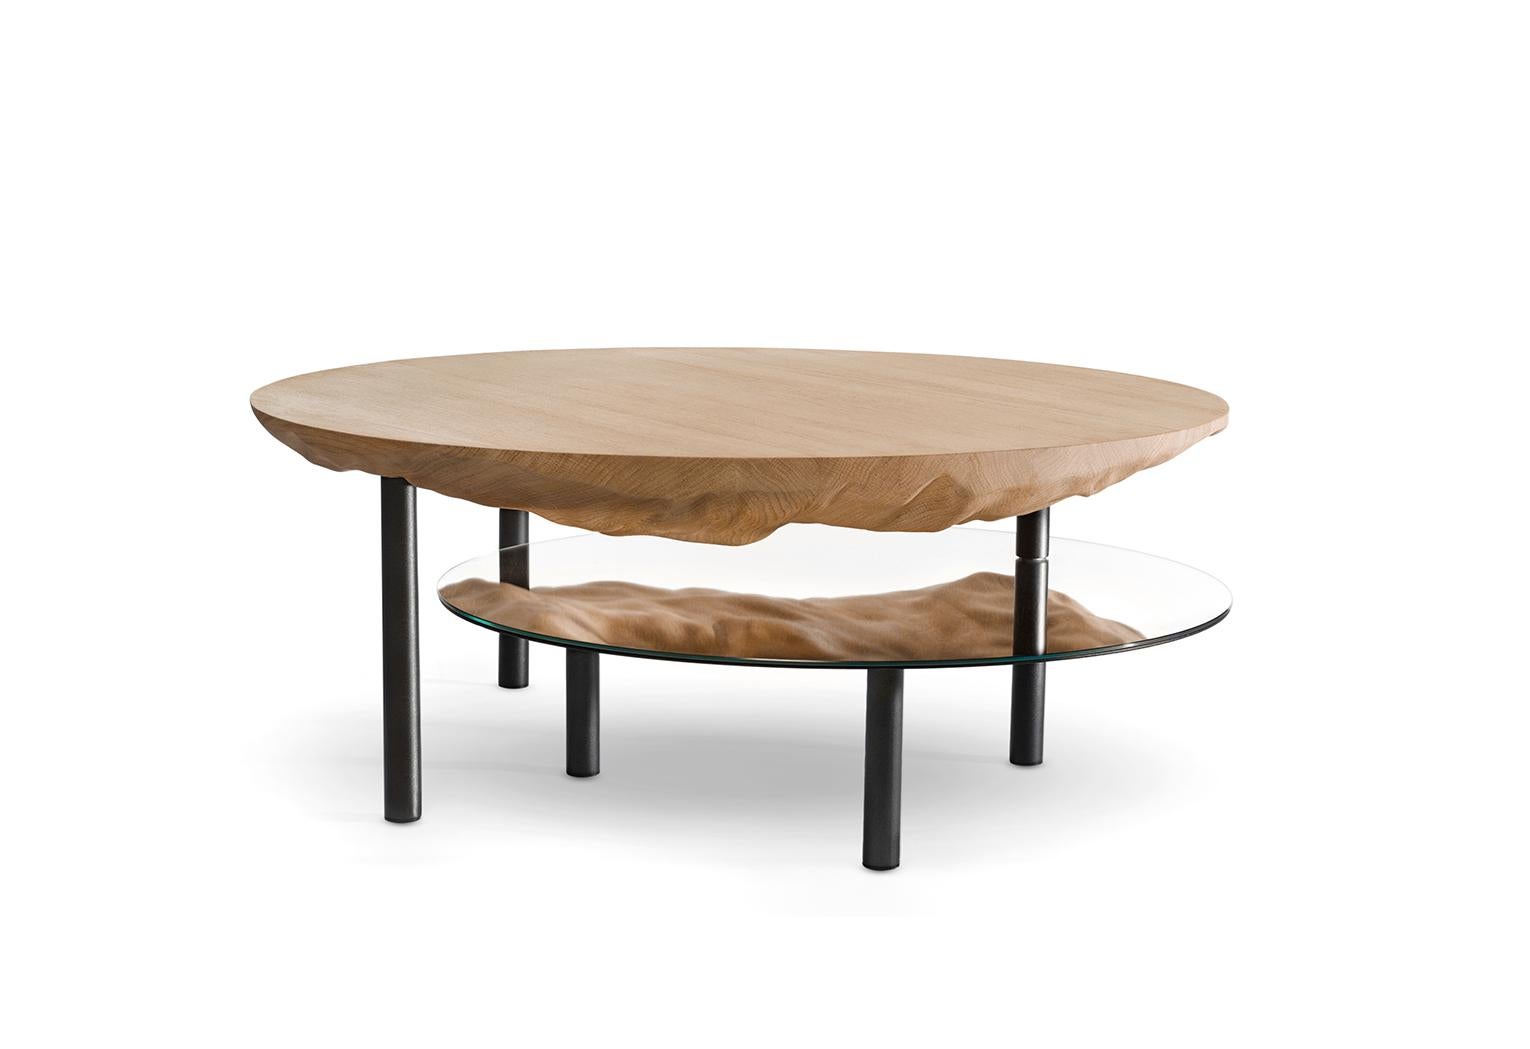 Solco is a coffee table that hides its game well. The purity of the object hides a sculptural surprise. 
Compounded of two tops, this solid oak table reveals its hidden side thanks to the mirror pivoting along a central leg. 
The gouged side